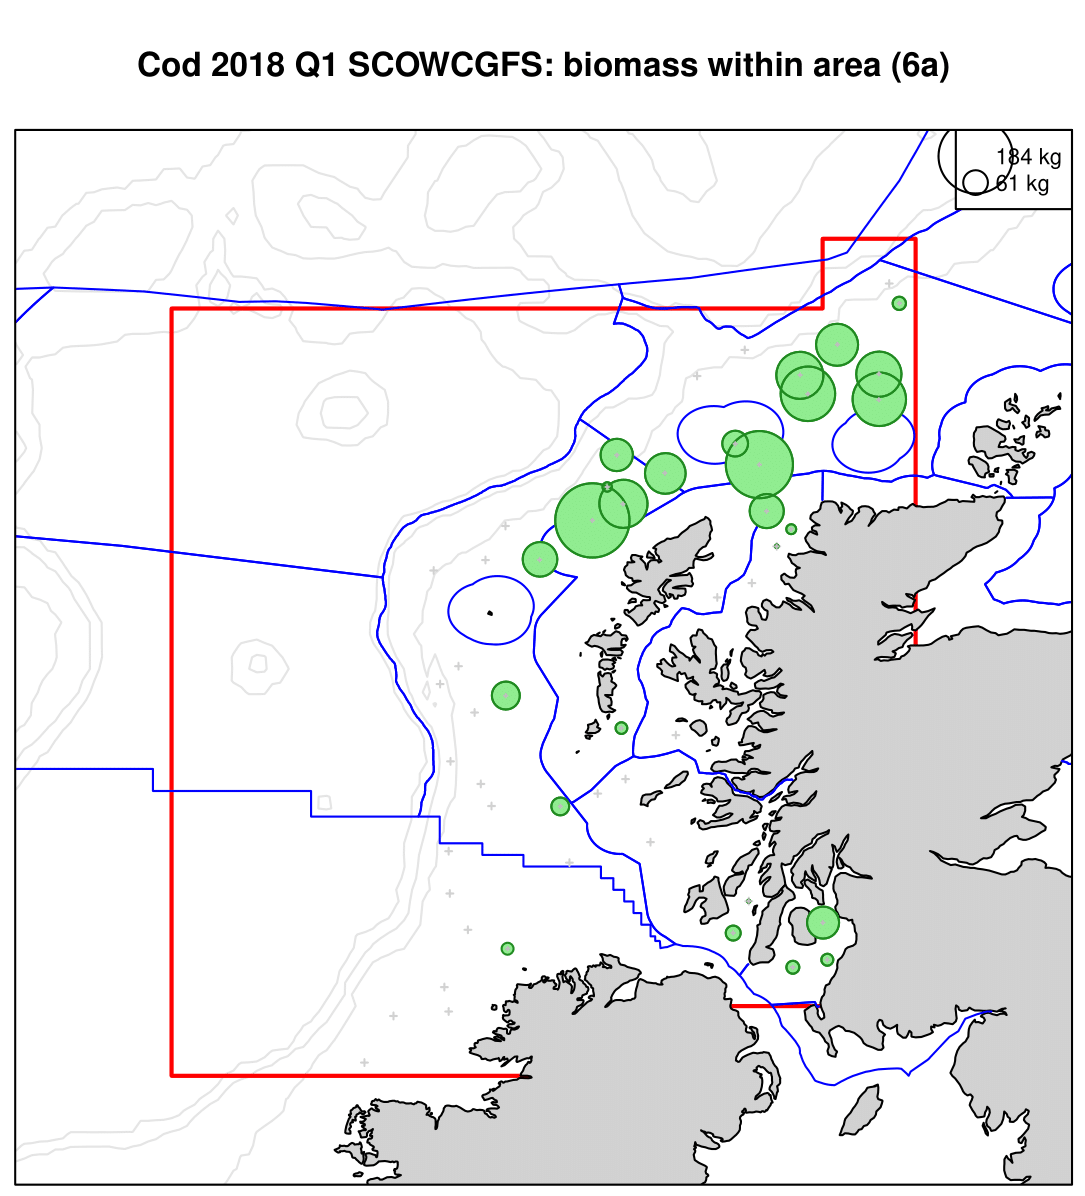 Cod 2018 Q1 SCOWCGFS: biomass within area (6a)